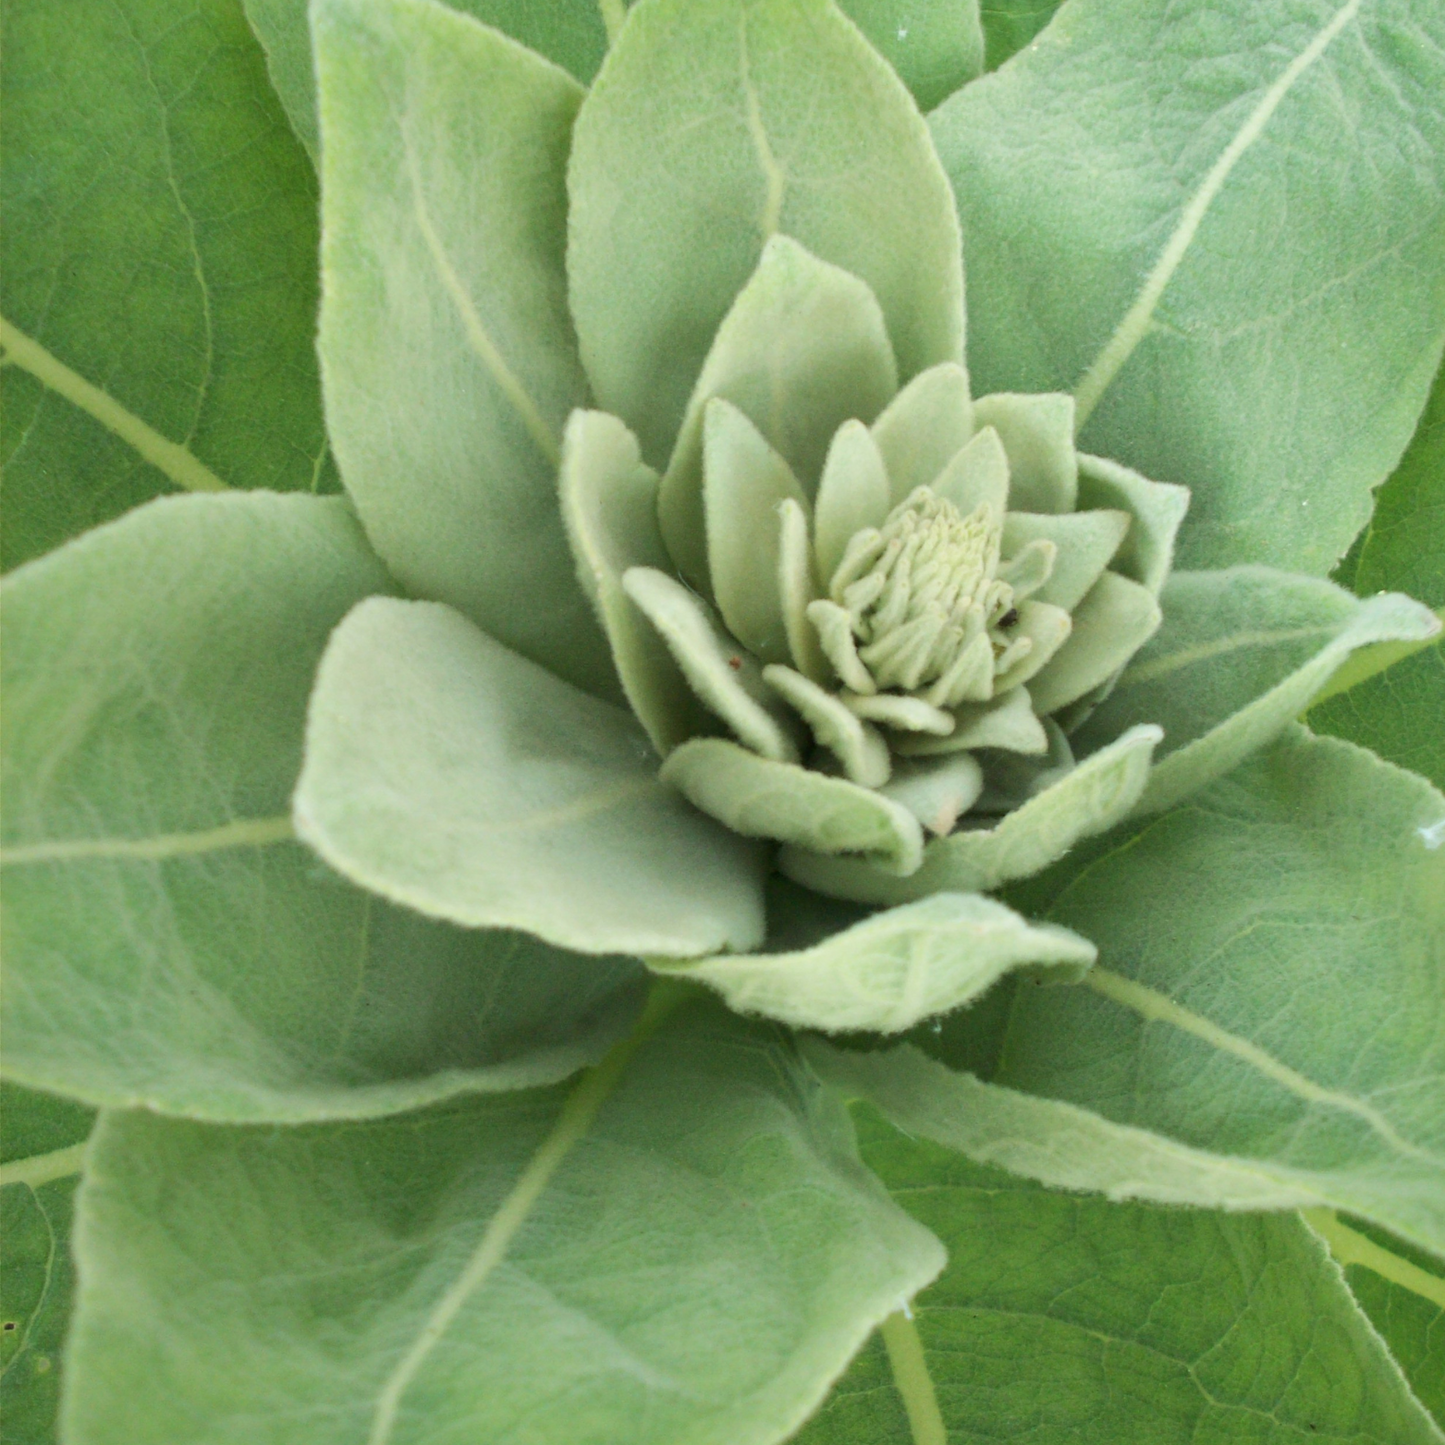 Witchy Pooh's Mullein Leaf Herb for Smudging, Ritual to Cleanse and Empower the Aura